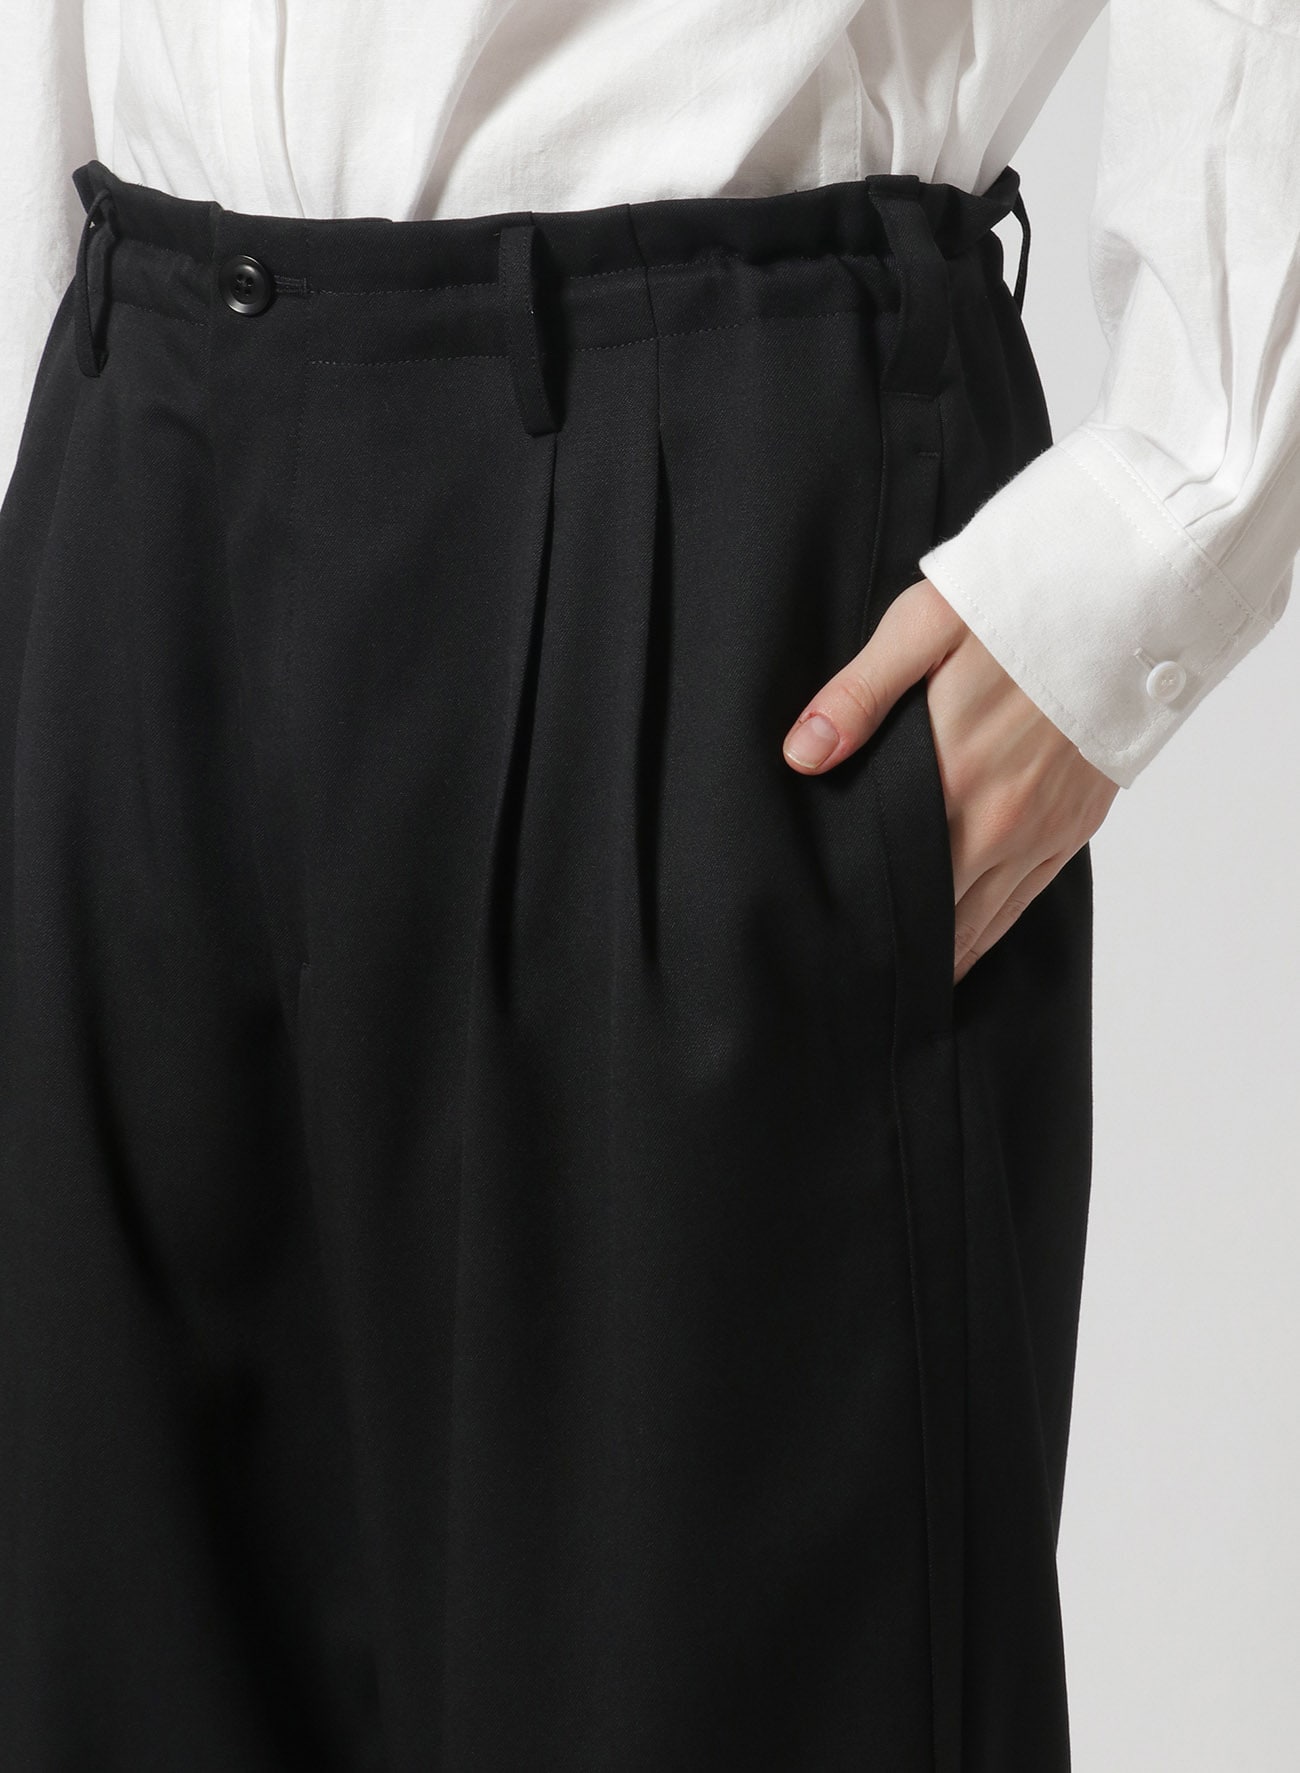 [Y's-Black Name] WOOL GABARDINE DOUBLE PLEATED PANTS WITH BUTTONS ON HEM